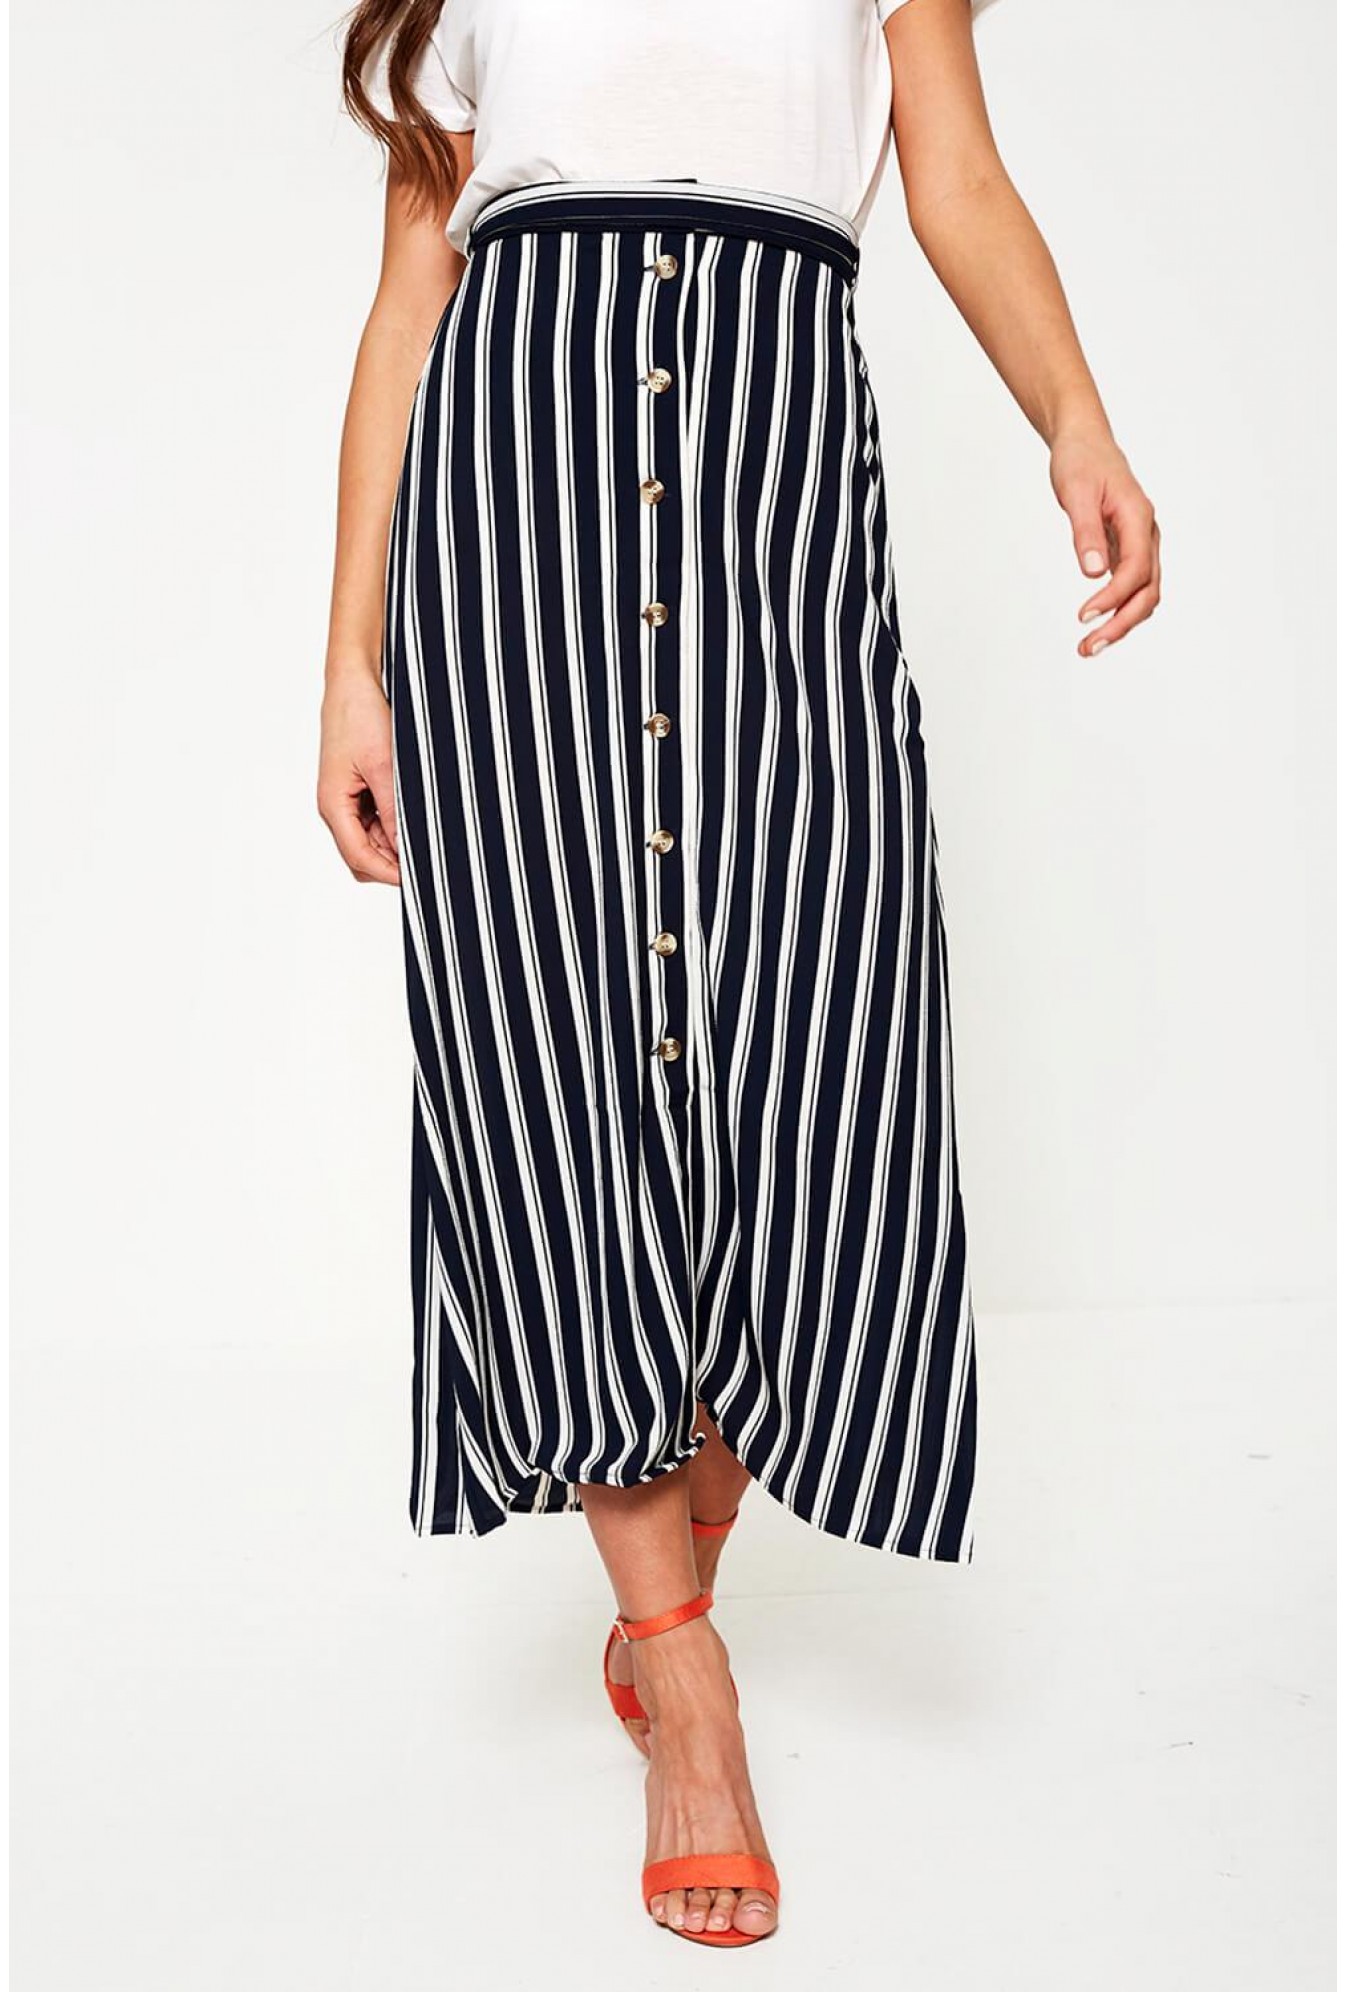 Vero Moda Button Front Ankle Skirt in Navy and White Stripe | iCLOTHING